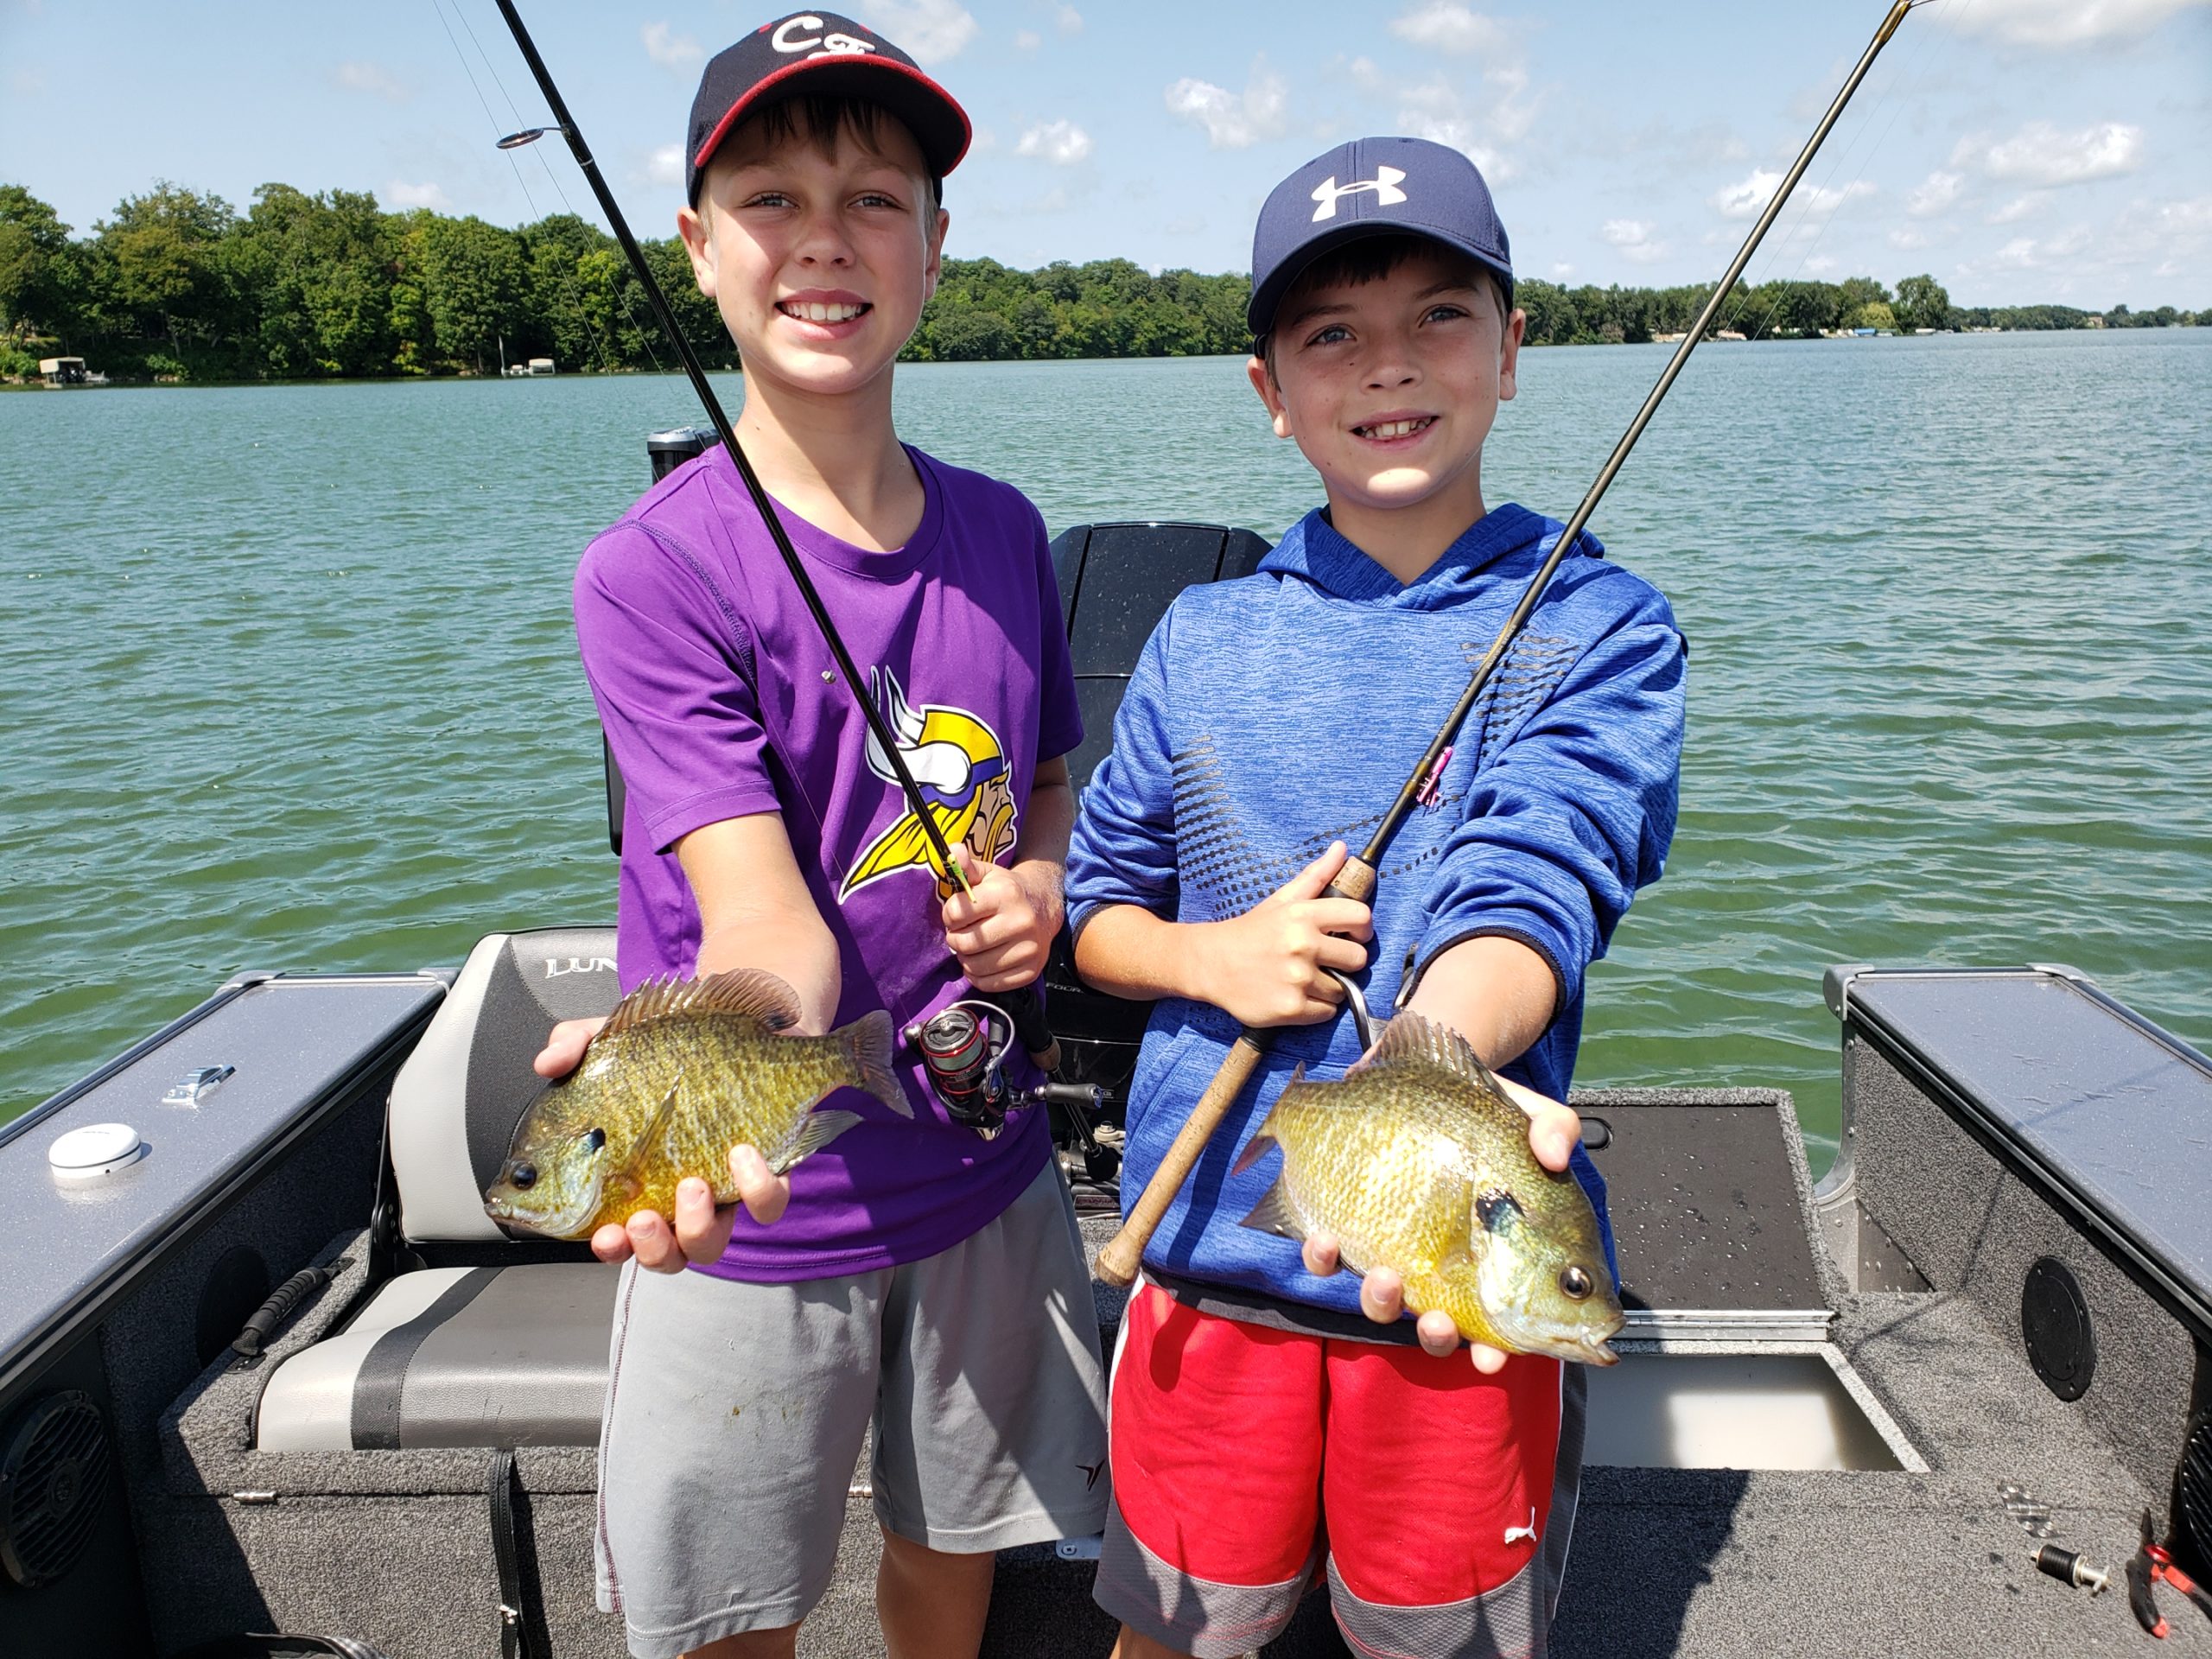 Two youth fisherman holding up bluegills they caught